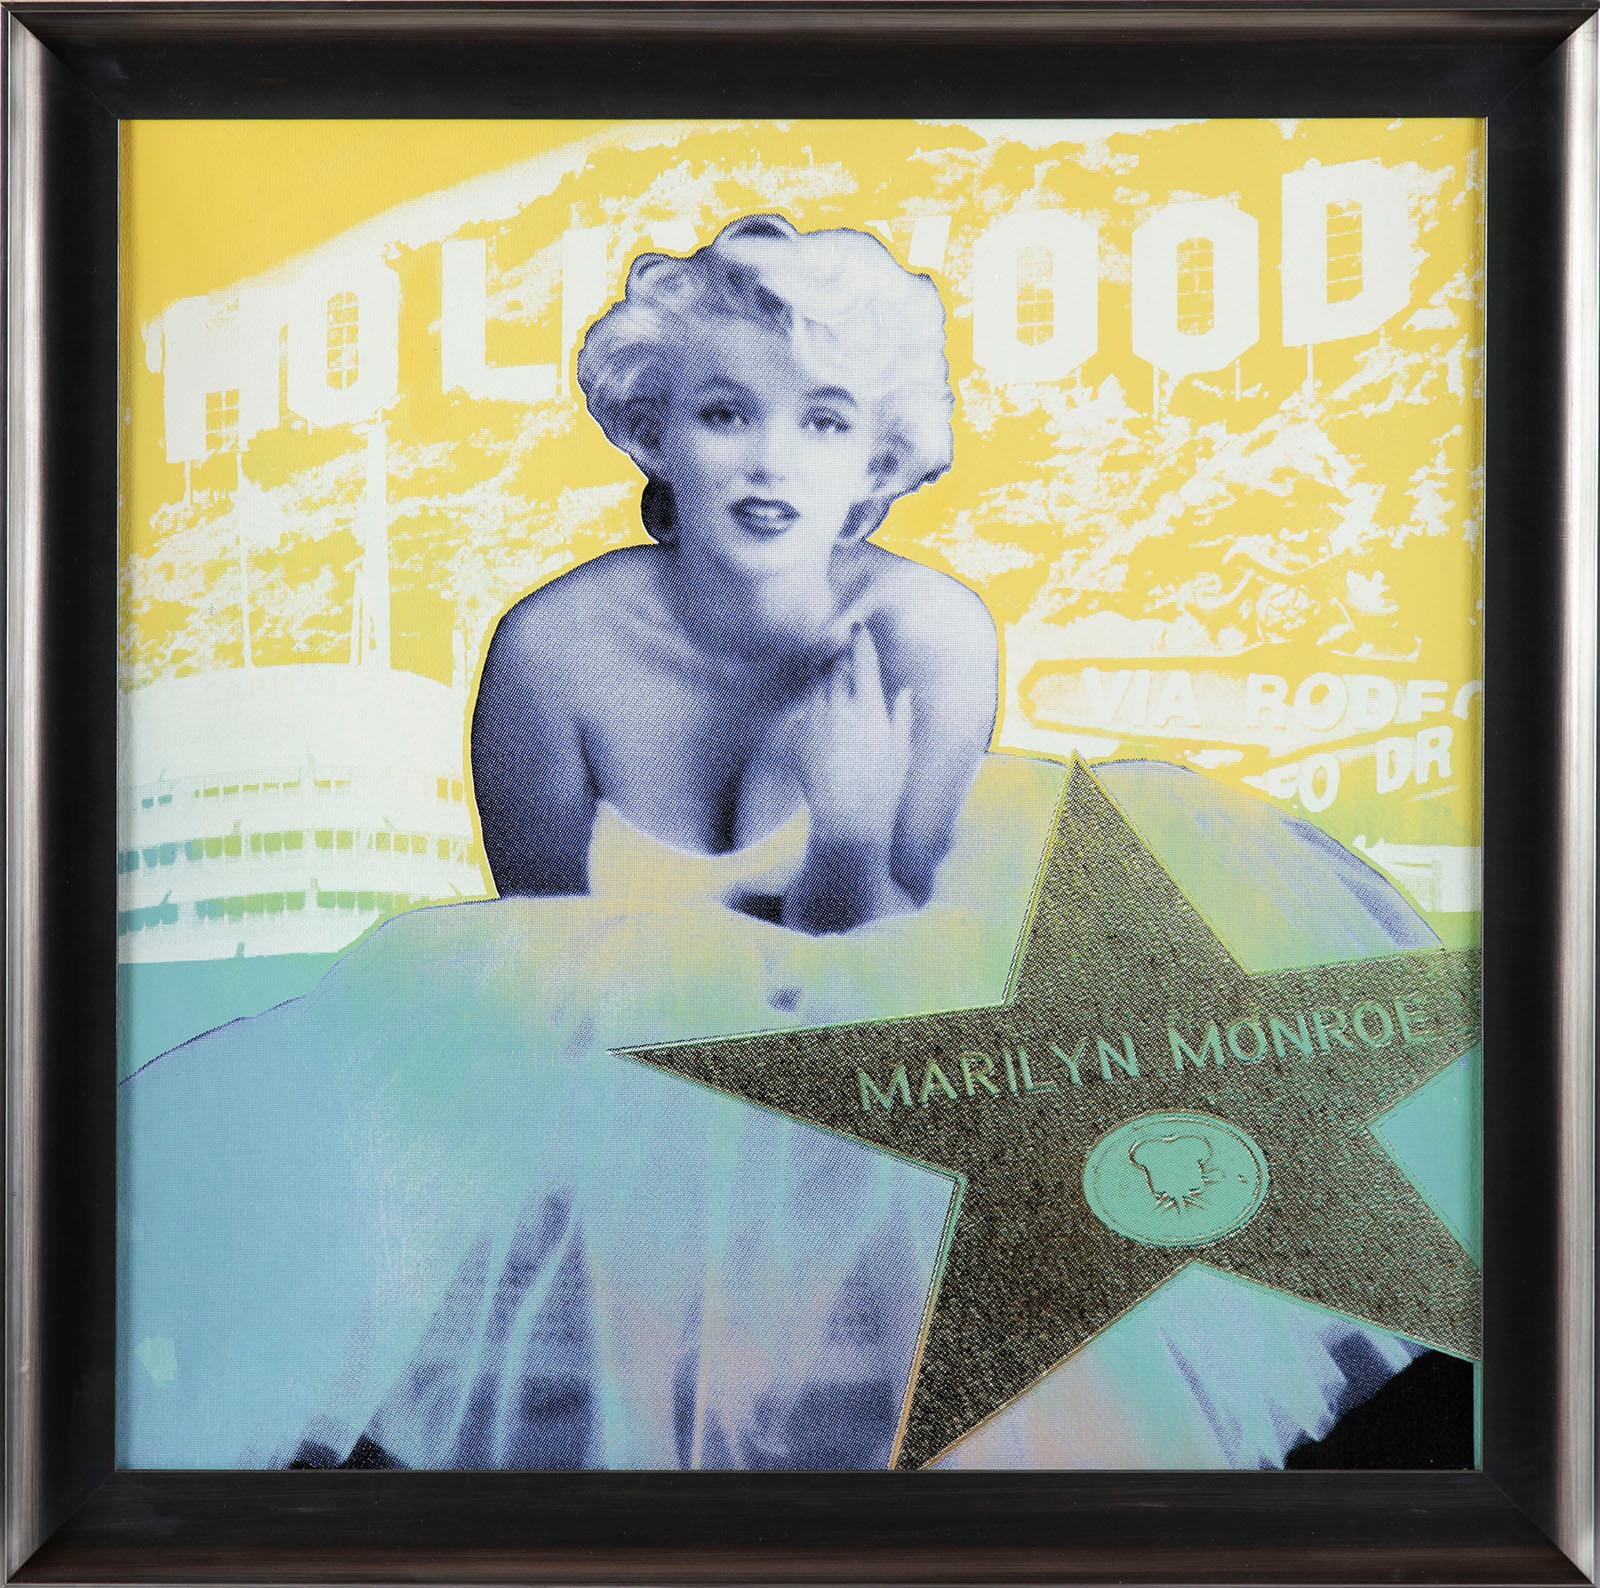 Title: Hollywood Marilyn
Medium: Original Hand Painted Screenprint 
Size Framed 34 5/8 x 34 1/2 Size Unframed: 30 x 30 
Edition size: 50 
Condition: The condition of this piece is outstanding. 
It has been freshly stretched Larson Juhl stretcher